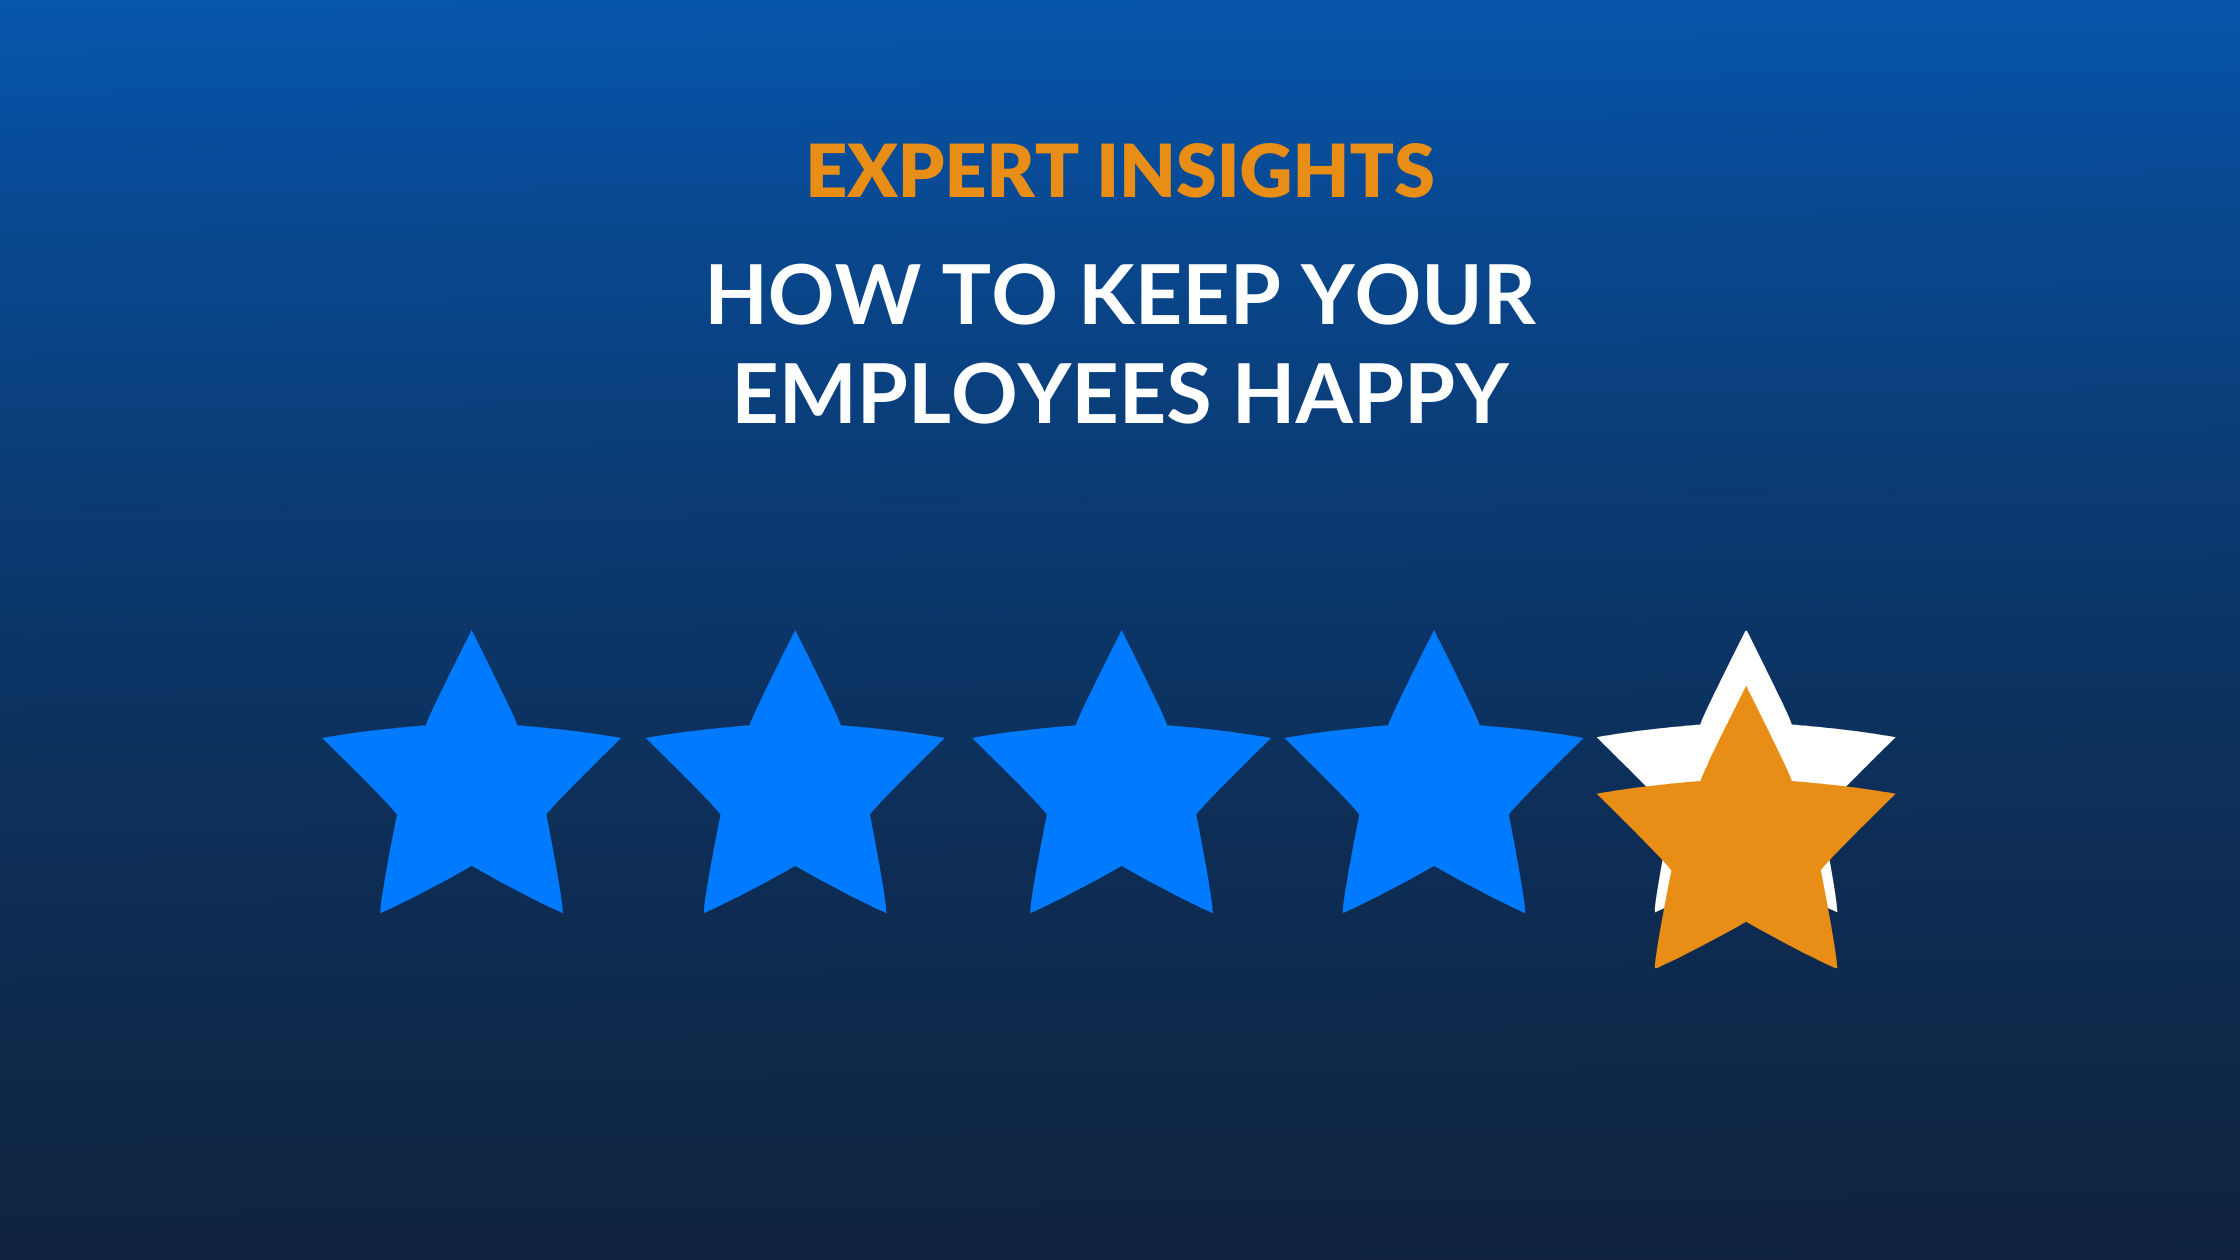 9 HR Leaders Share How They Keep Their Employees Happy